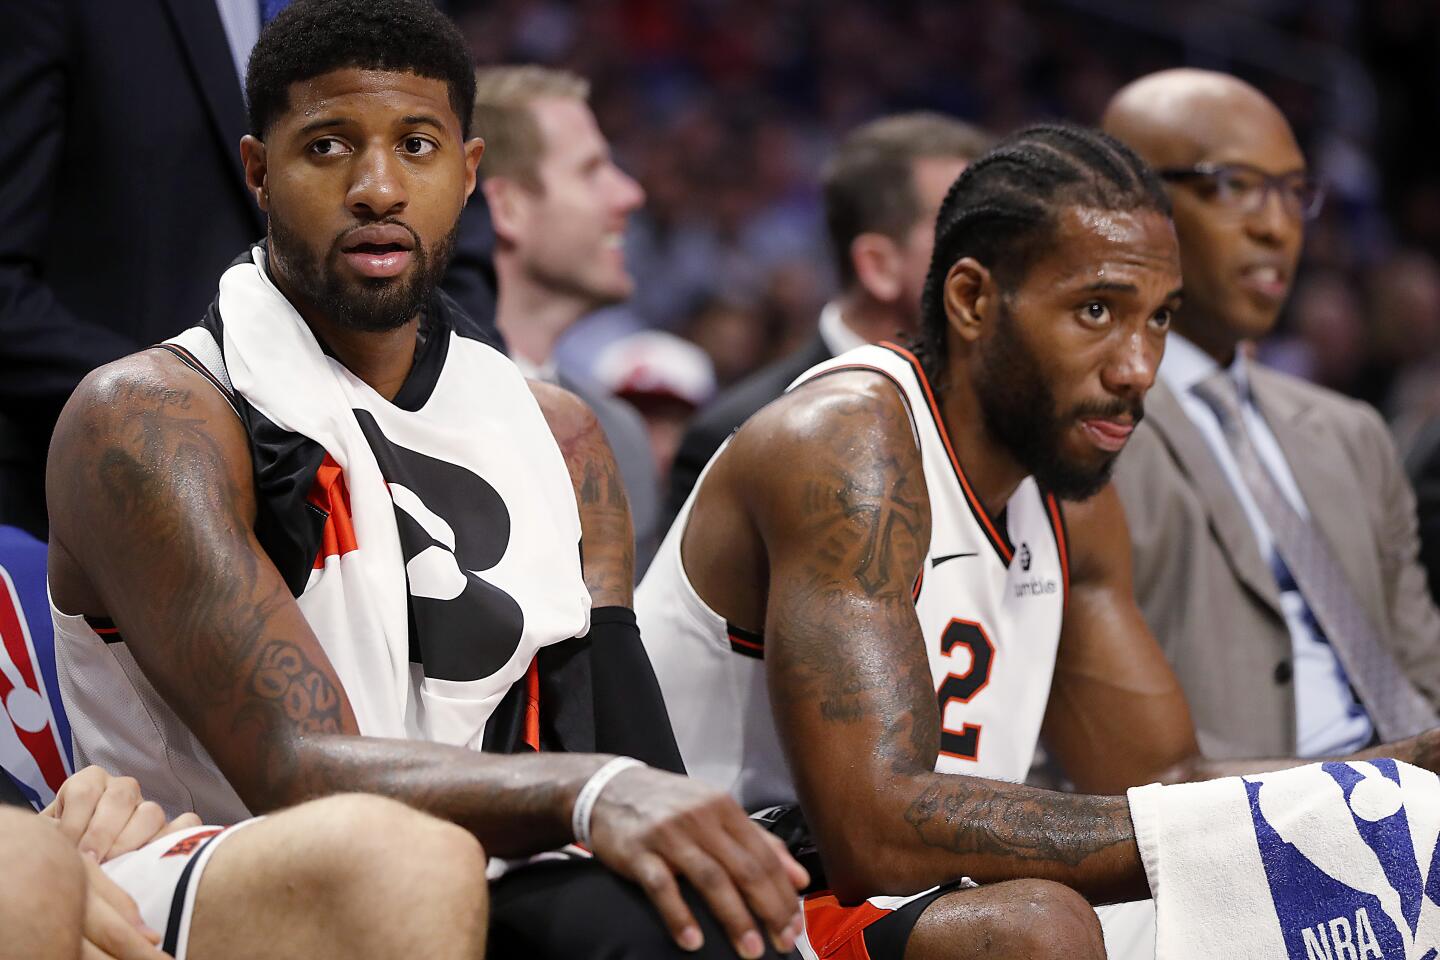 Clippers stars Paul George, left, and Kawhi Leonard rest on the bench in the fourth quarter at Staples Center on Tuesday.